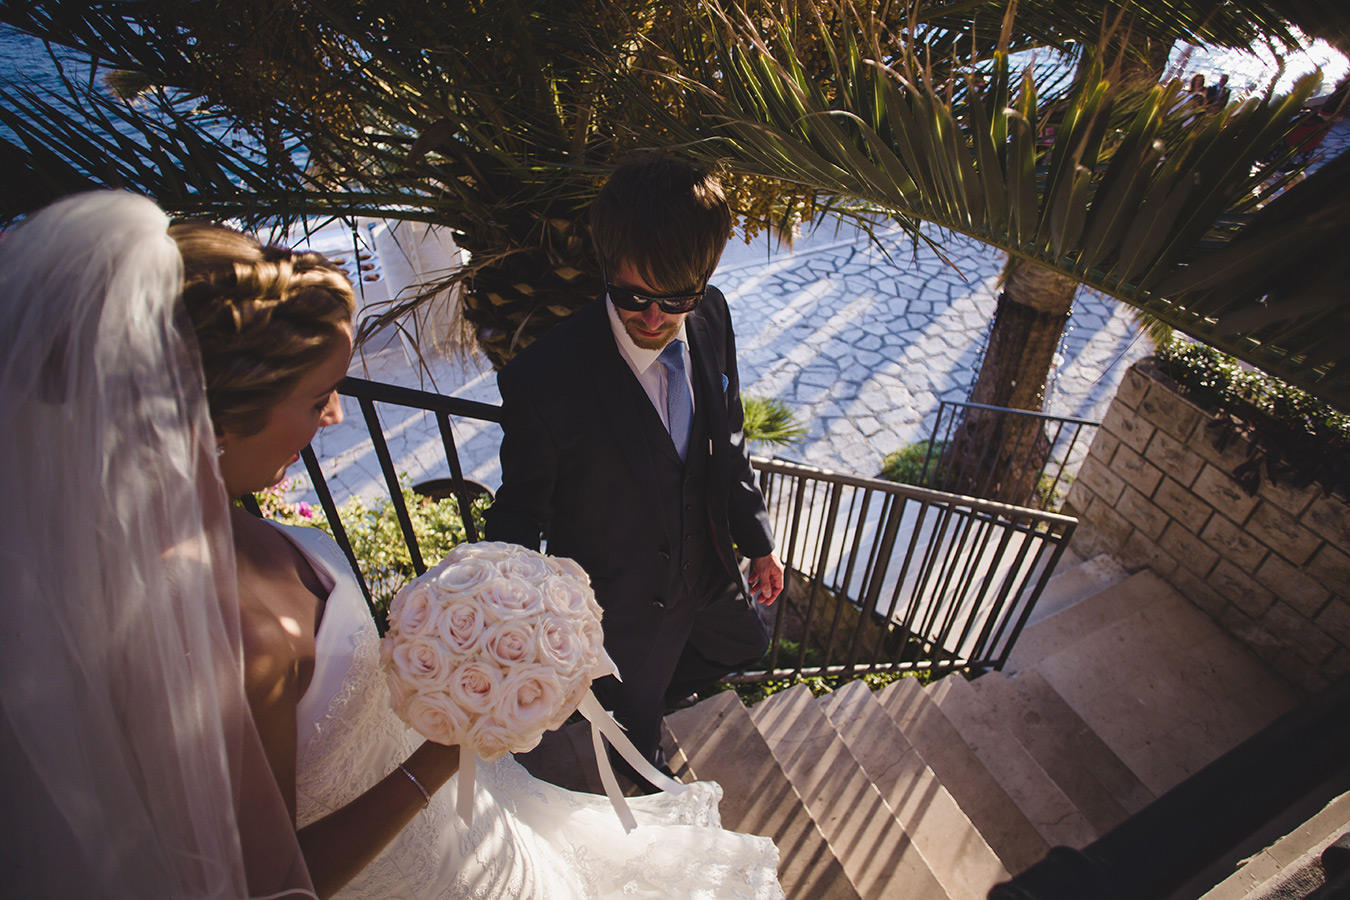 One of a set of images taken at this chic destination Wedding of Jenna & Nick. The stylish old town of Dubrovnik, Croatia.  The Bride and Groom walk down the stairs. Photography by Matt Porteous